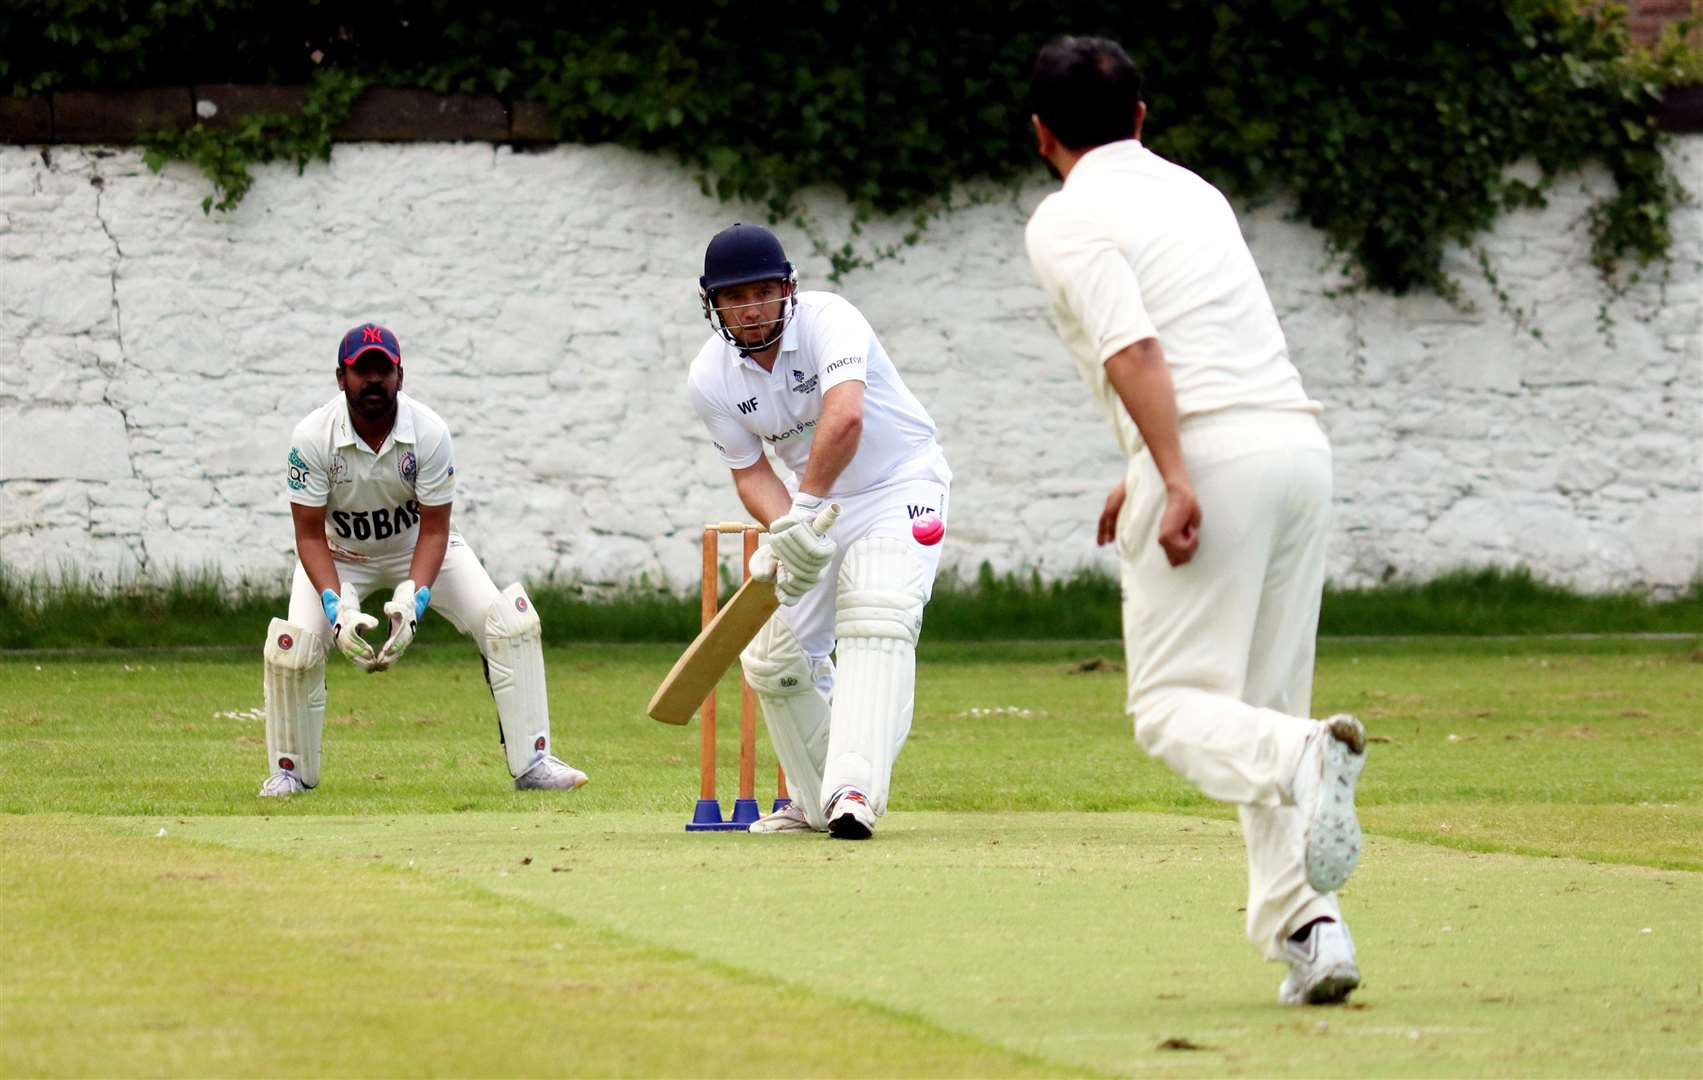 Counties skipper Will Ford watches the ball carefully while batting. Picture: James Mackenzie